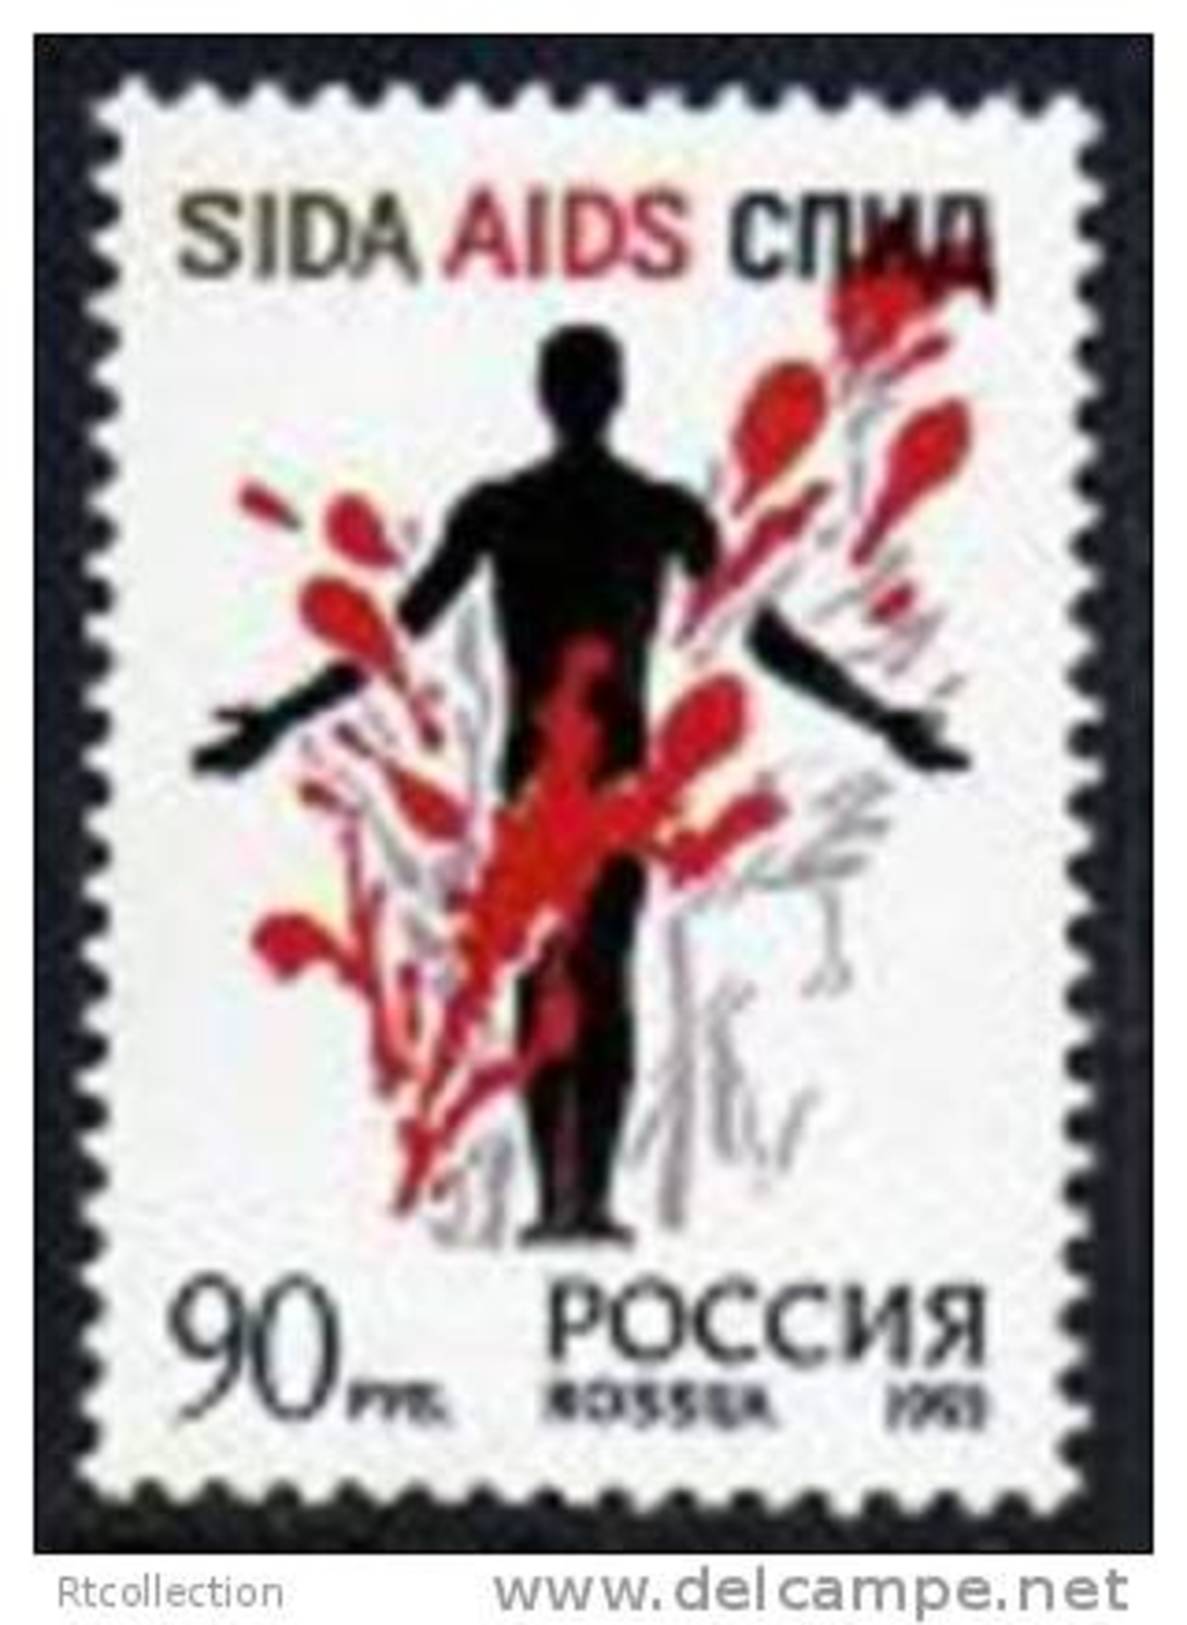 USSR Russia 1993 - One Health Prevention Of  AIDS / Fight Against Aids Blood Disease Stamp MNH Michel 347 Russia 6183 - Collections